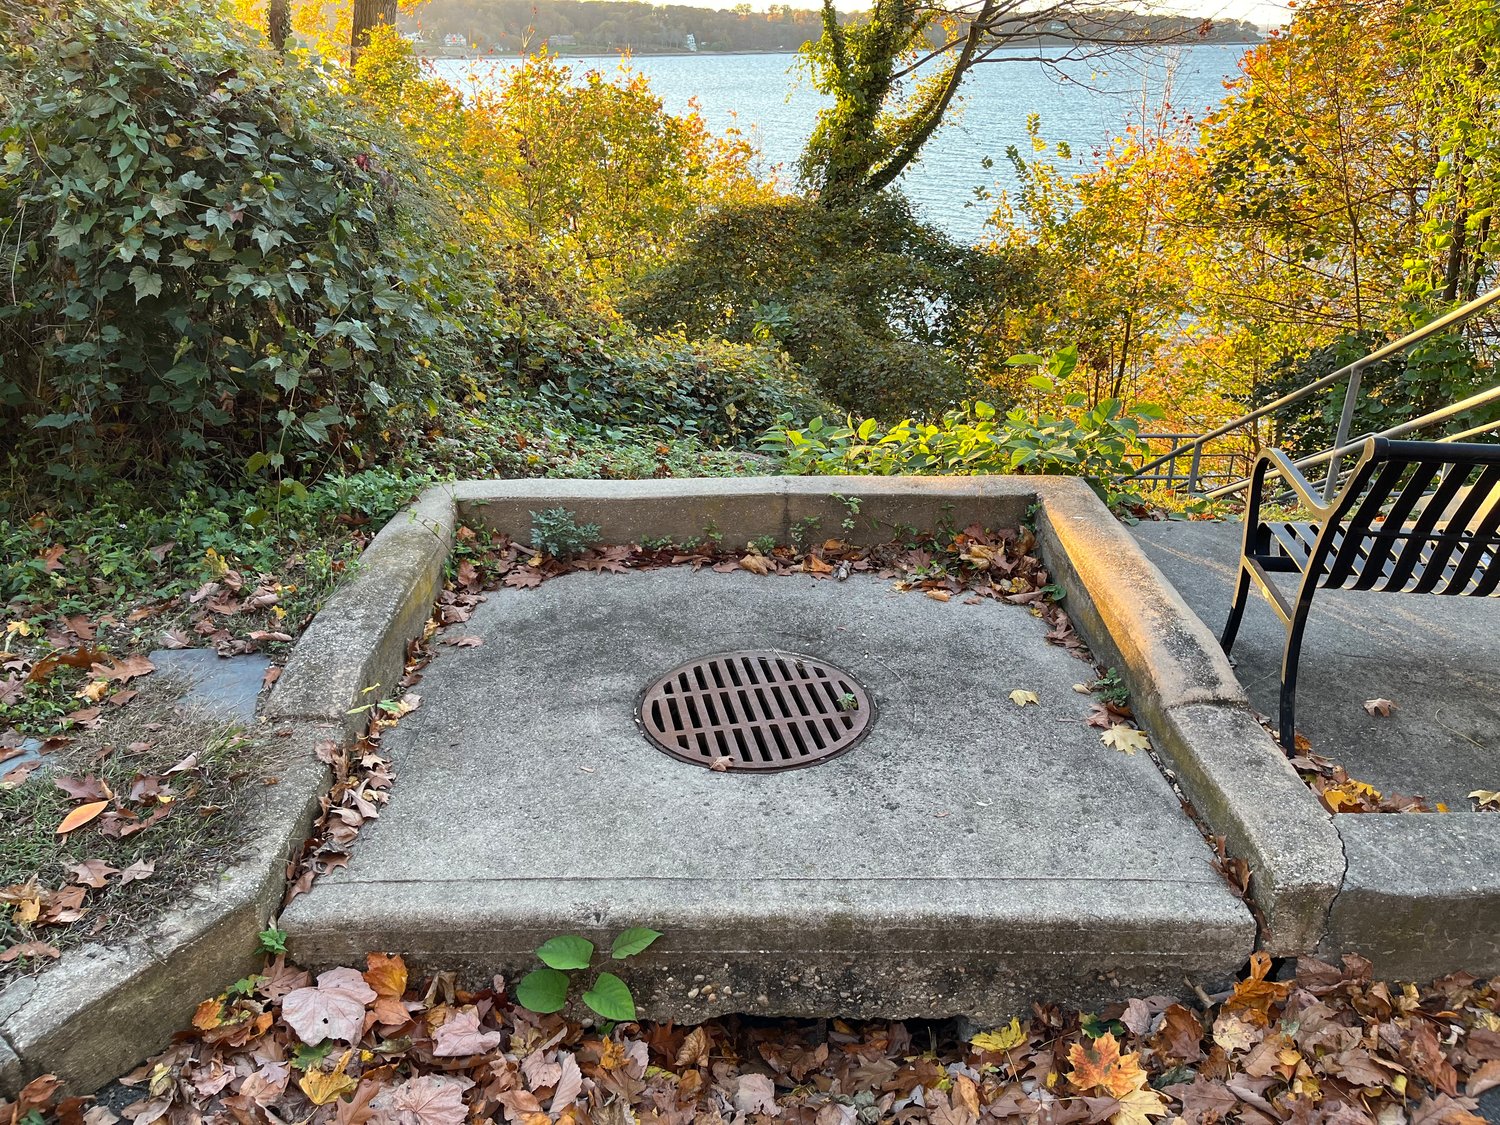 The storm drain starts at the top of the Tilley Steps, and much of the village’s stormwater runs through the 100-year-old piping.